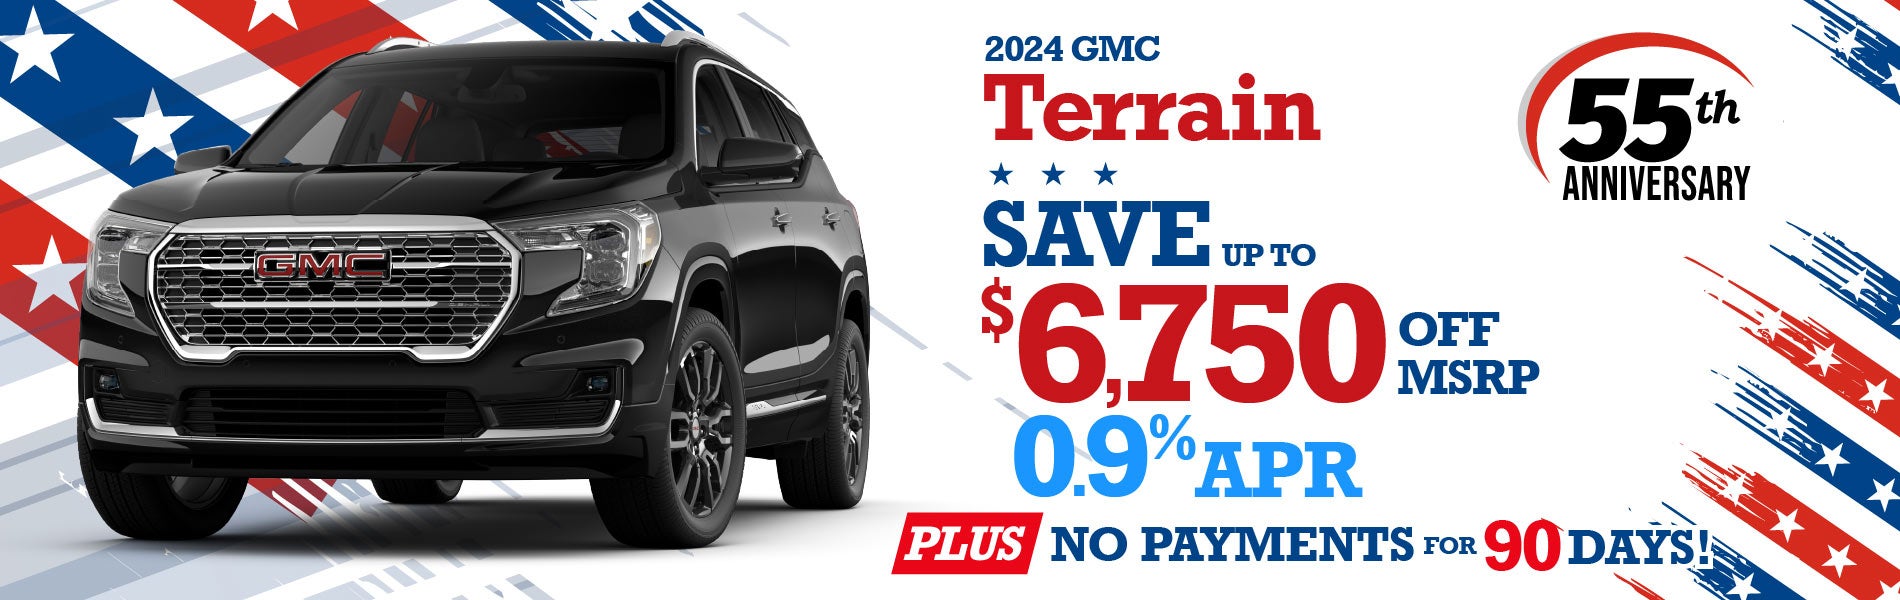 2024 GMC Terrain - SAVE up to $7750 or 0.9% APR